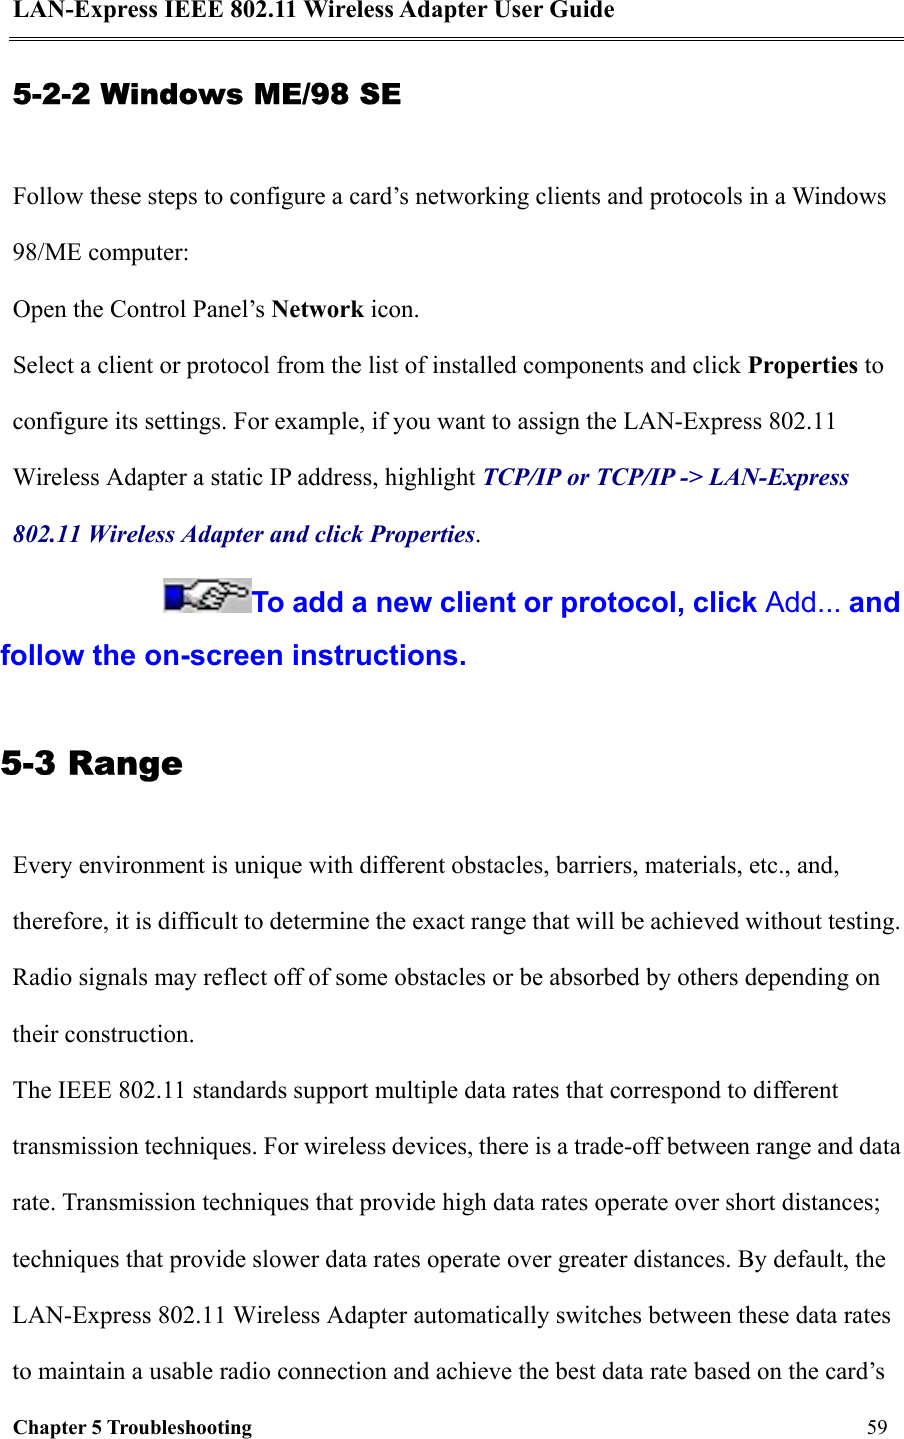 LAN-Express IEEE 802.11 Wireless Adapter User Guide Chapter 5 Troubleshooting   59  5-2-2 Windows ME/98 SE Follow these steps to configure a card’s networking clients and protocols in a Windows 98/ME computer: Open the Control Panel’s Network icon.  Select a client or protocol from the list of installed components and click Properties to configure its settings. For example, if you want to assign the LAN-Express 802.11 Wireless Adapter a static IP address, highlight TCP/IP or TCP/IP -&gt; LAN-Express 802.11 Wireless Adapter and click Properties. To add a new client or protocol, click Add... and follow the on-screen instructions. 5-3 Range Every environment is unique with different obstacles, barriers, materials, etc., and, therefore, it is difficult to determine the exact range that will be achieved without testing. Radio signals may reflect off of some obstacles or be absorbed by others depending on their construction. The IEEE 802.11 standards support multiple data rates that correspond to different transmission techniques. For wireless devices, there is a trade-off between range and data rate. Transmission techniques that provide high data rates operate over short distances; techniques that provide slower data rates operate over greater distances. By default, the LAN-Express 802.11 Wireless Adapter automatically switches between these data rates to maintain a usable radio connection and achieve the best data rate based on the card’s 